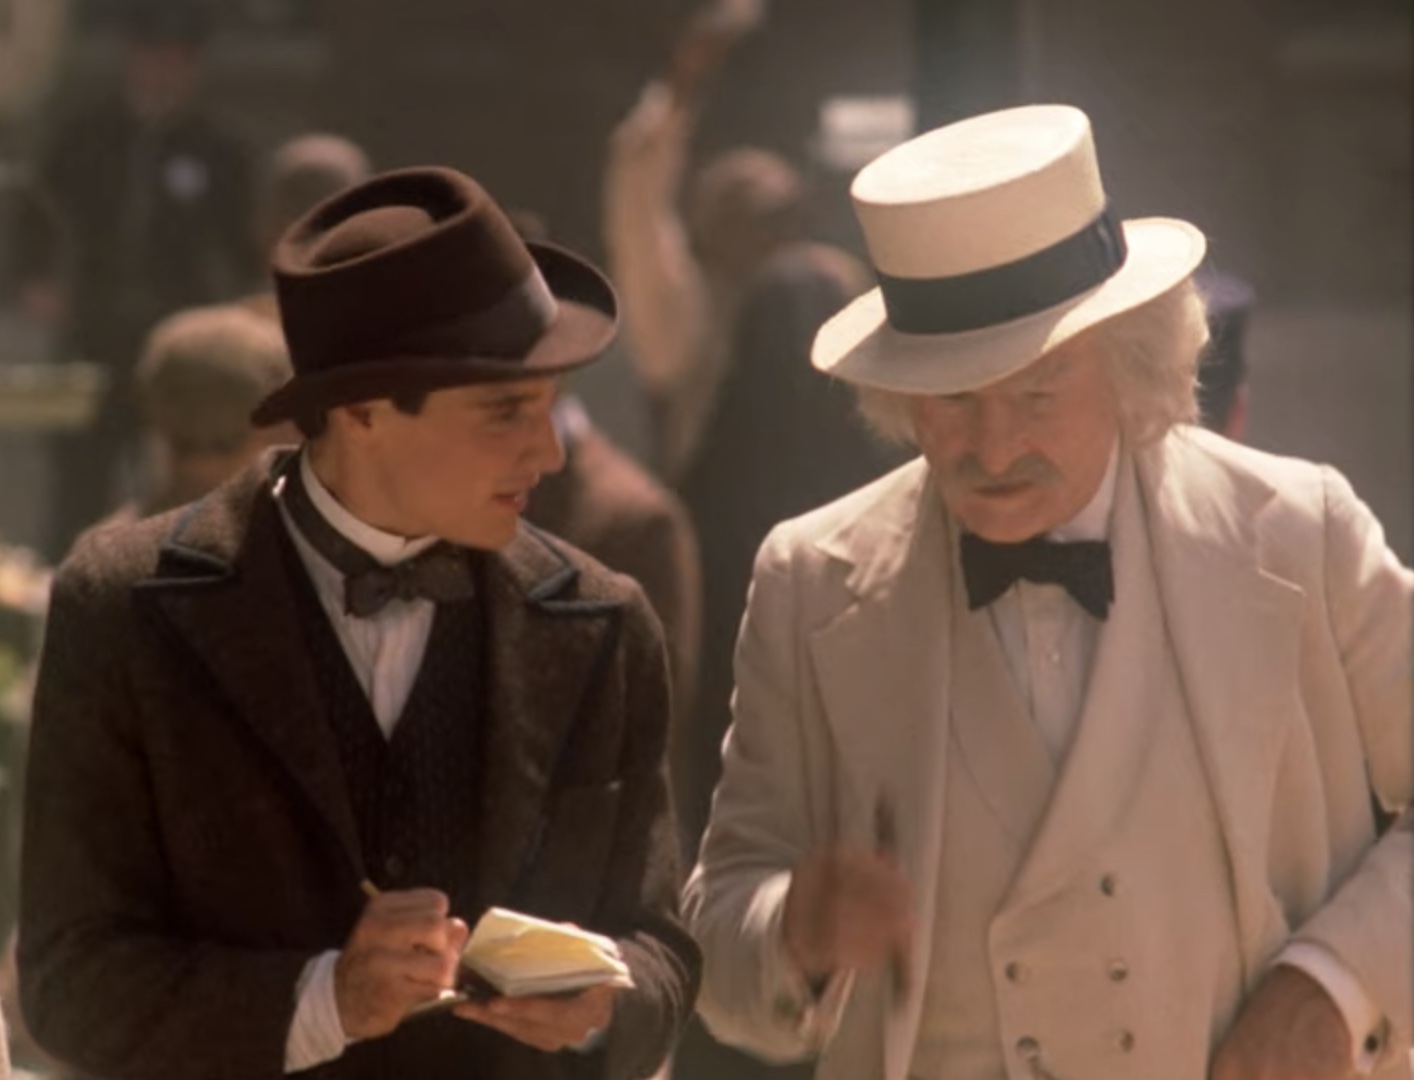 Still image from Star Trek TNG episode Time's Arrow, Part II showing a close-up of Samuel Clemens (aka Mark Twain) standing in the street, talking to a reporter holding a notepad sometime in the 1890s. Clemens is wearing a white three-piece with a white panama hat and holding a cigar. The reporter is wearing a dark brown suit with a homburg.